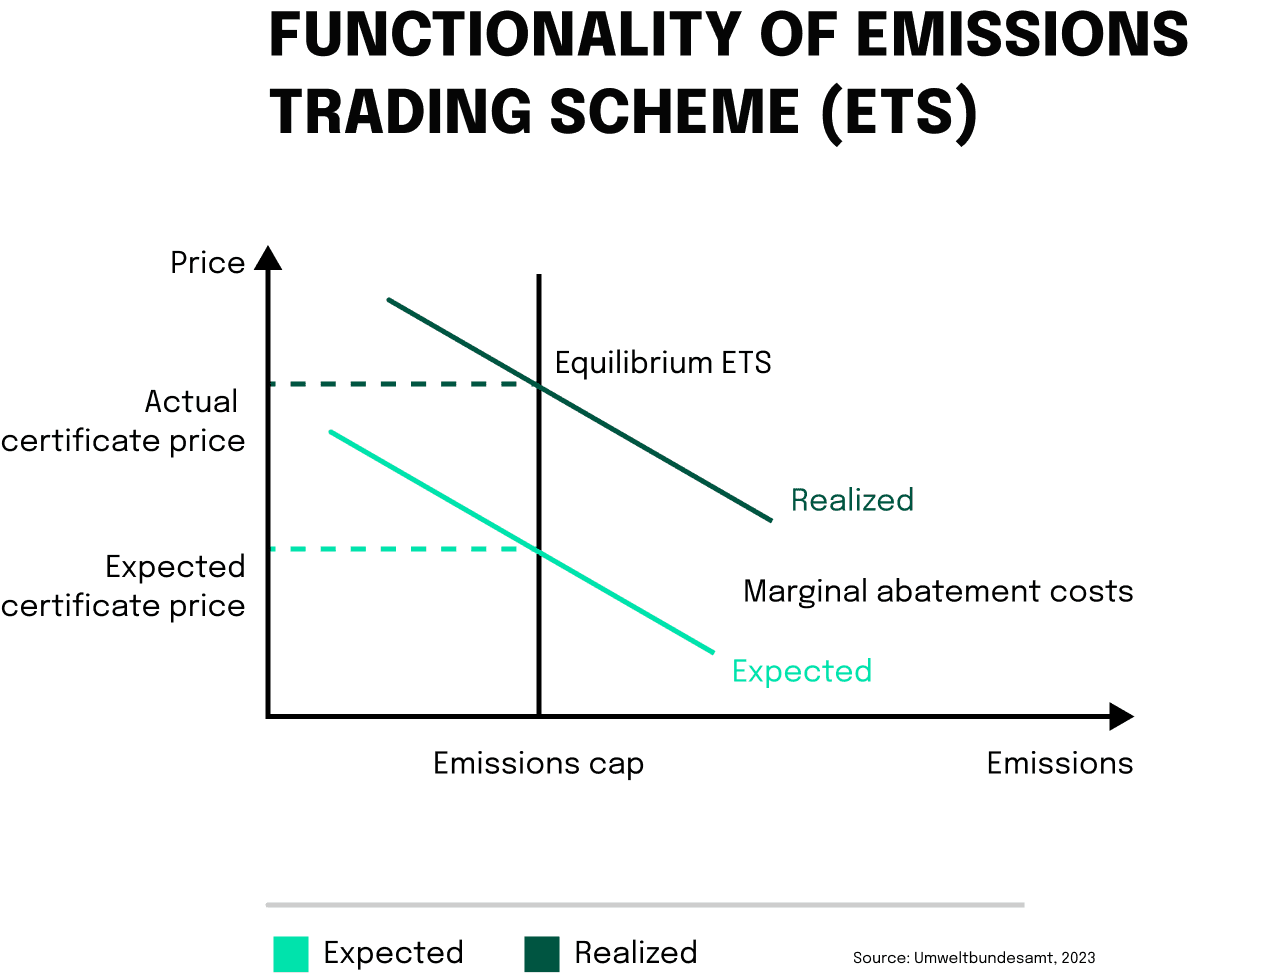 In emissions trading schemes, the availability of certificates is fixed. As a result, the market equalizes supply and demand by adjusting prices. If the cost of reducing emissions is higher than anticipated, the price of certificates may rise, resulting in increased costs for businesses and consumers. Conversely, if there is a lower demand for certificates, the prices will decrease.